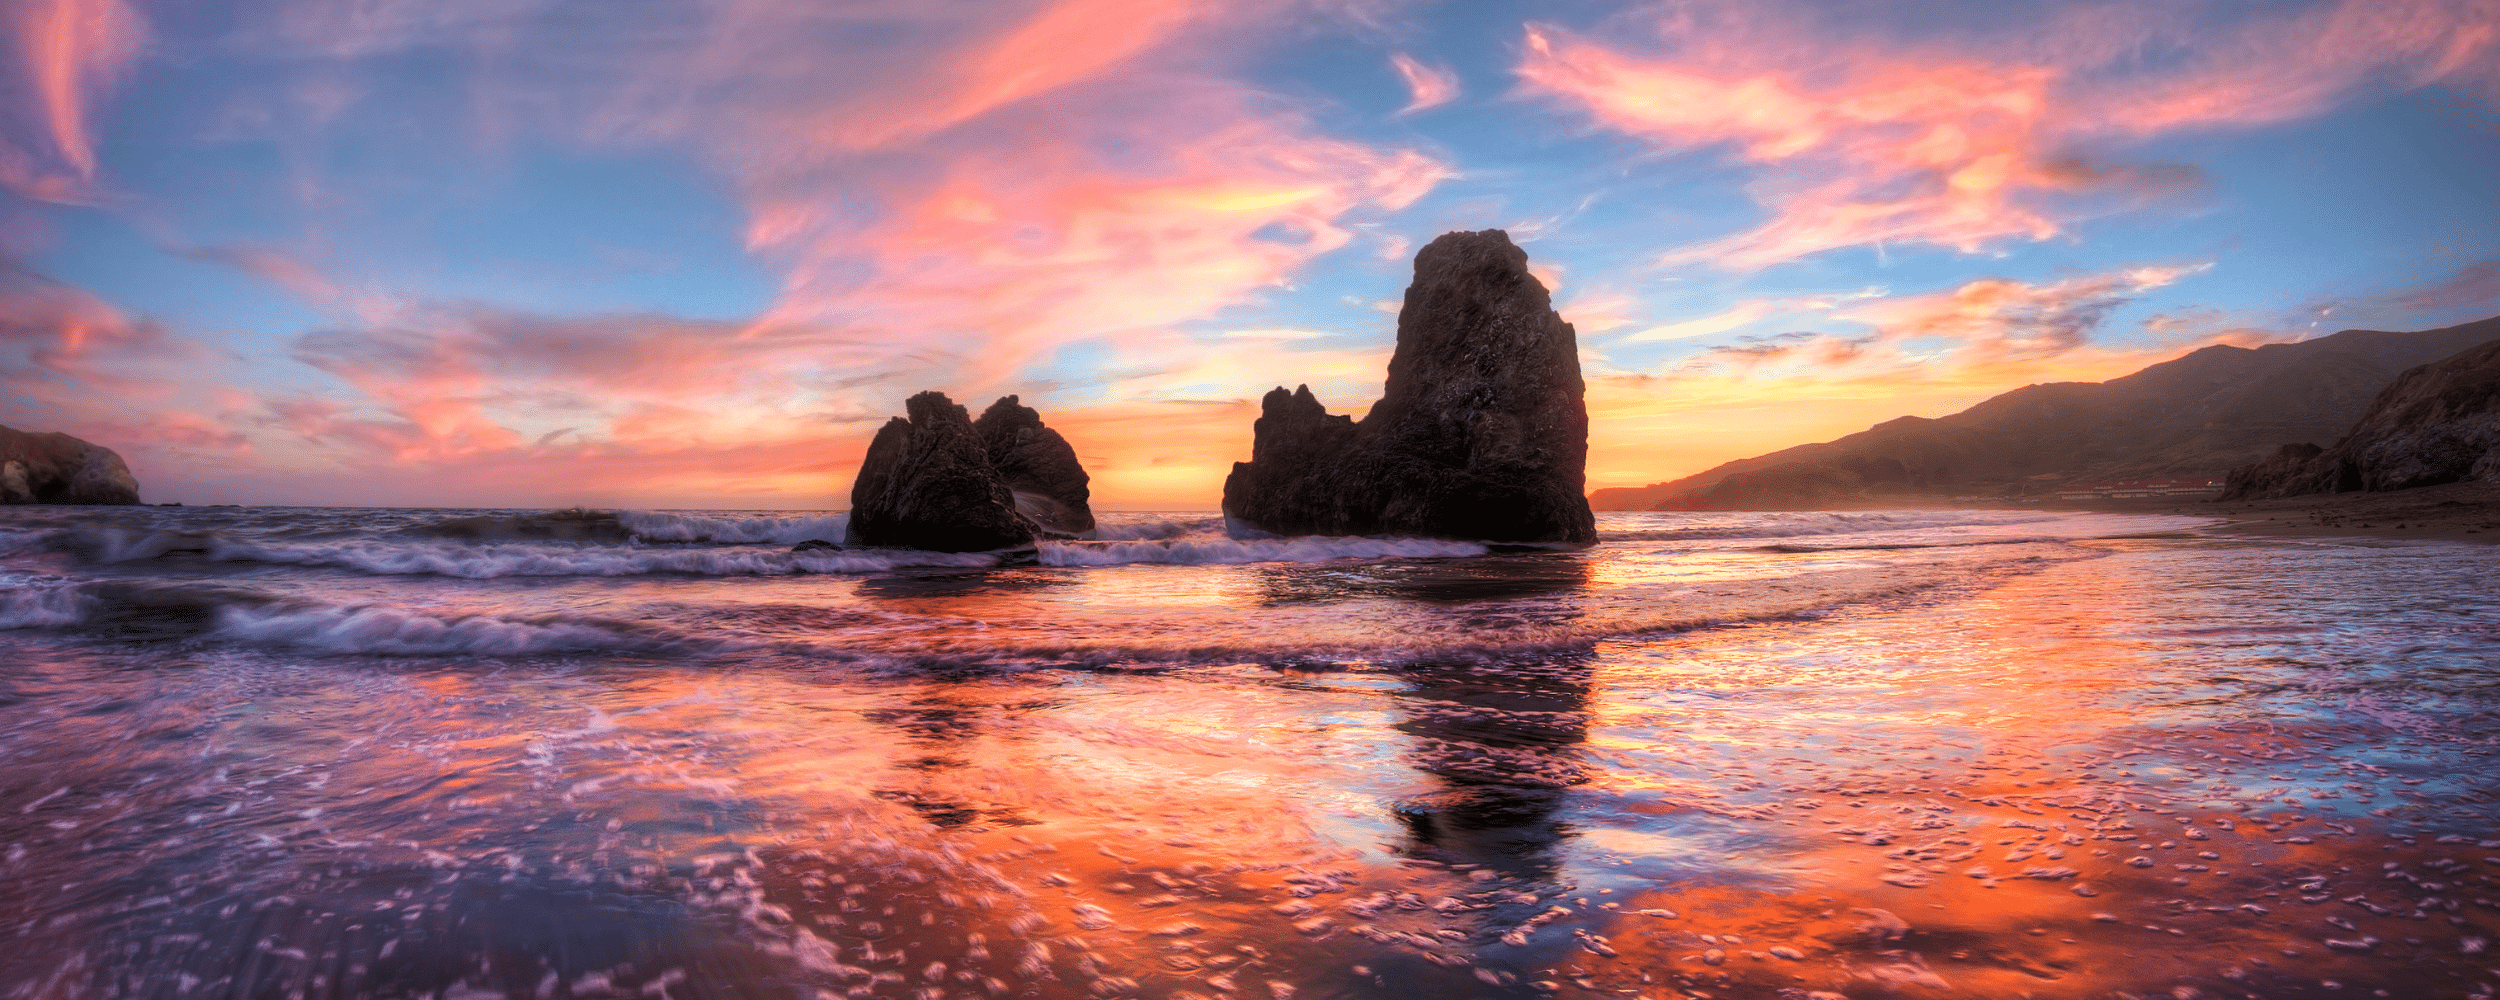 a beautiful sunset at the rodeo beach. rocky cliffs projecting above the beach water